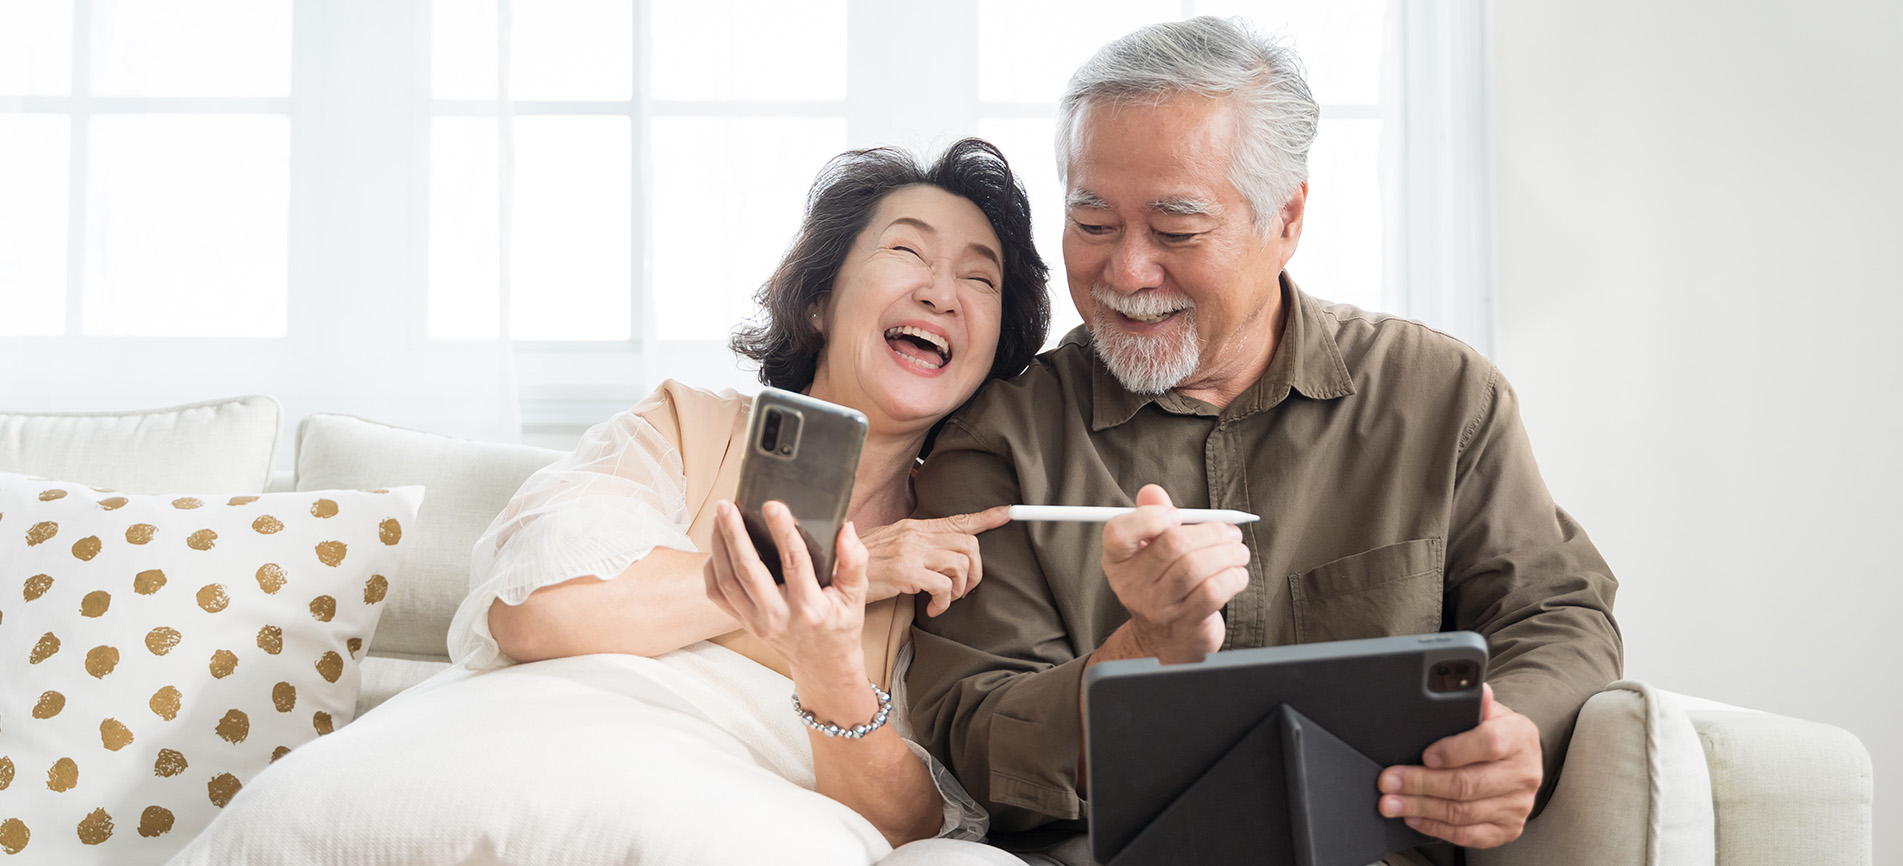 An older couple laugh and enjoy their time together while using a smartphone and tablet computer, relaxing on a couch in a sunny room in their home.